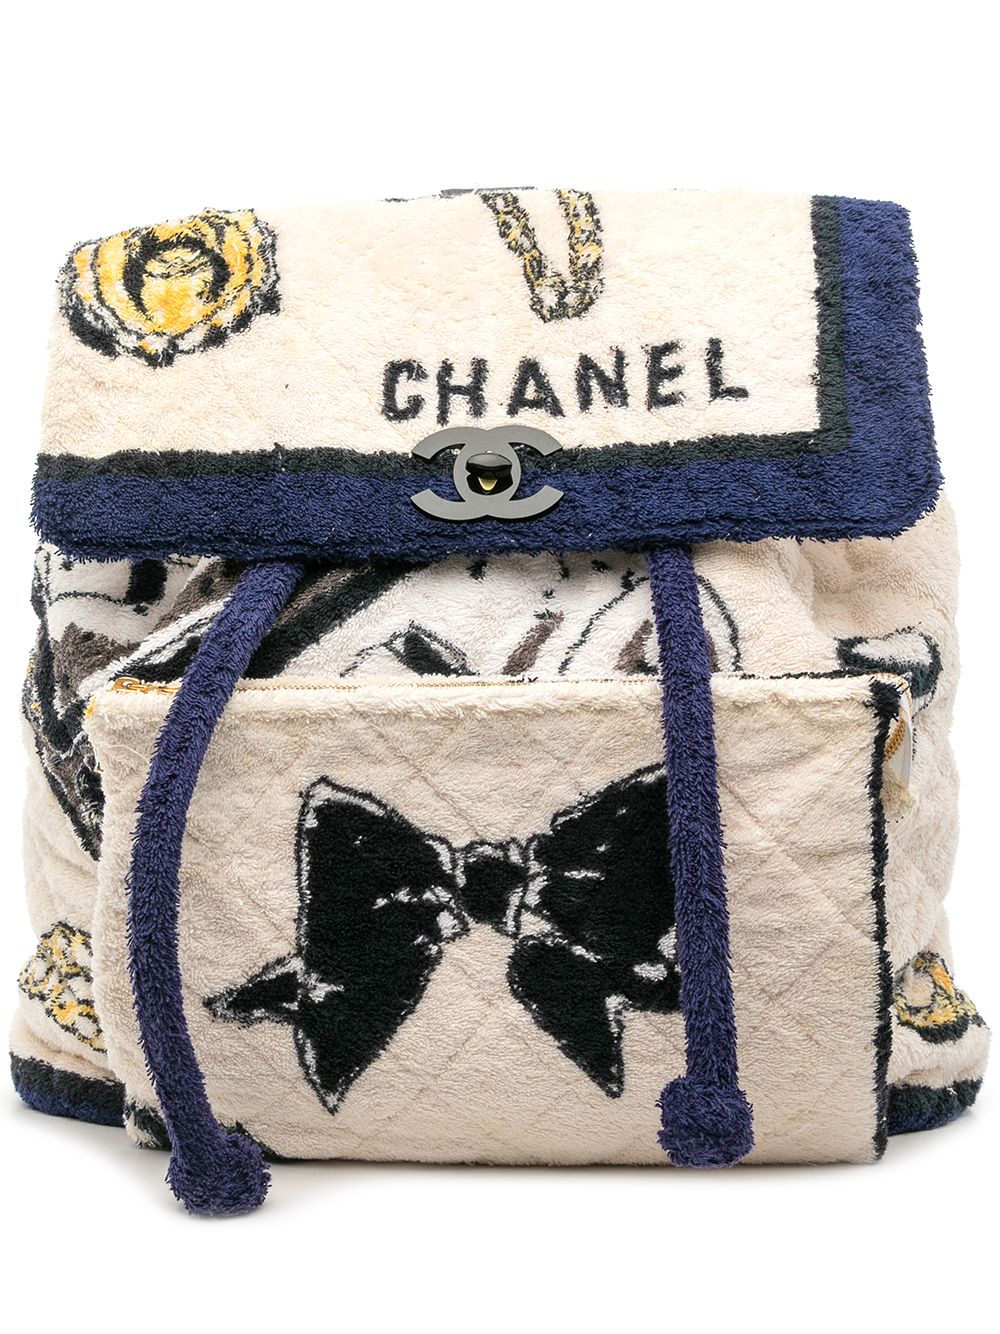 CHANEL Pre-Owned 1992 Gesteppter Rucksack - Weiß von CHANEL Pre-Owned